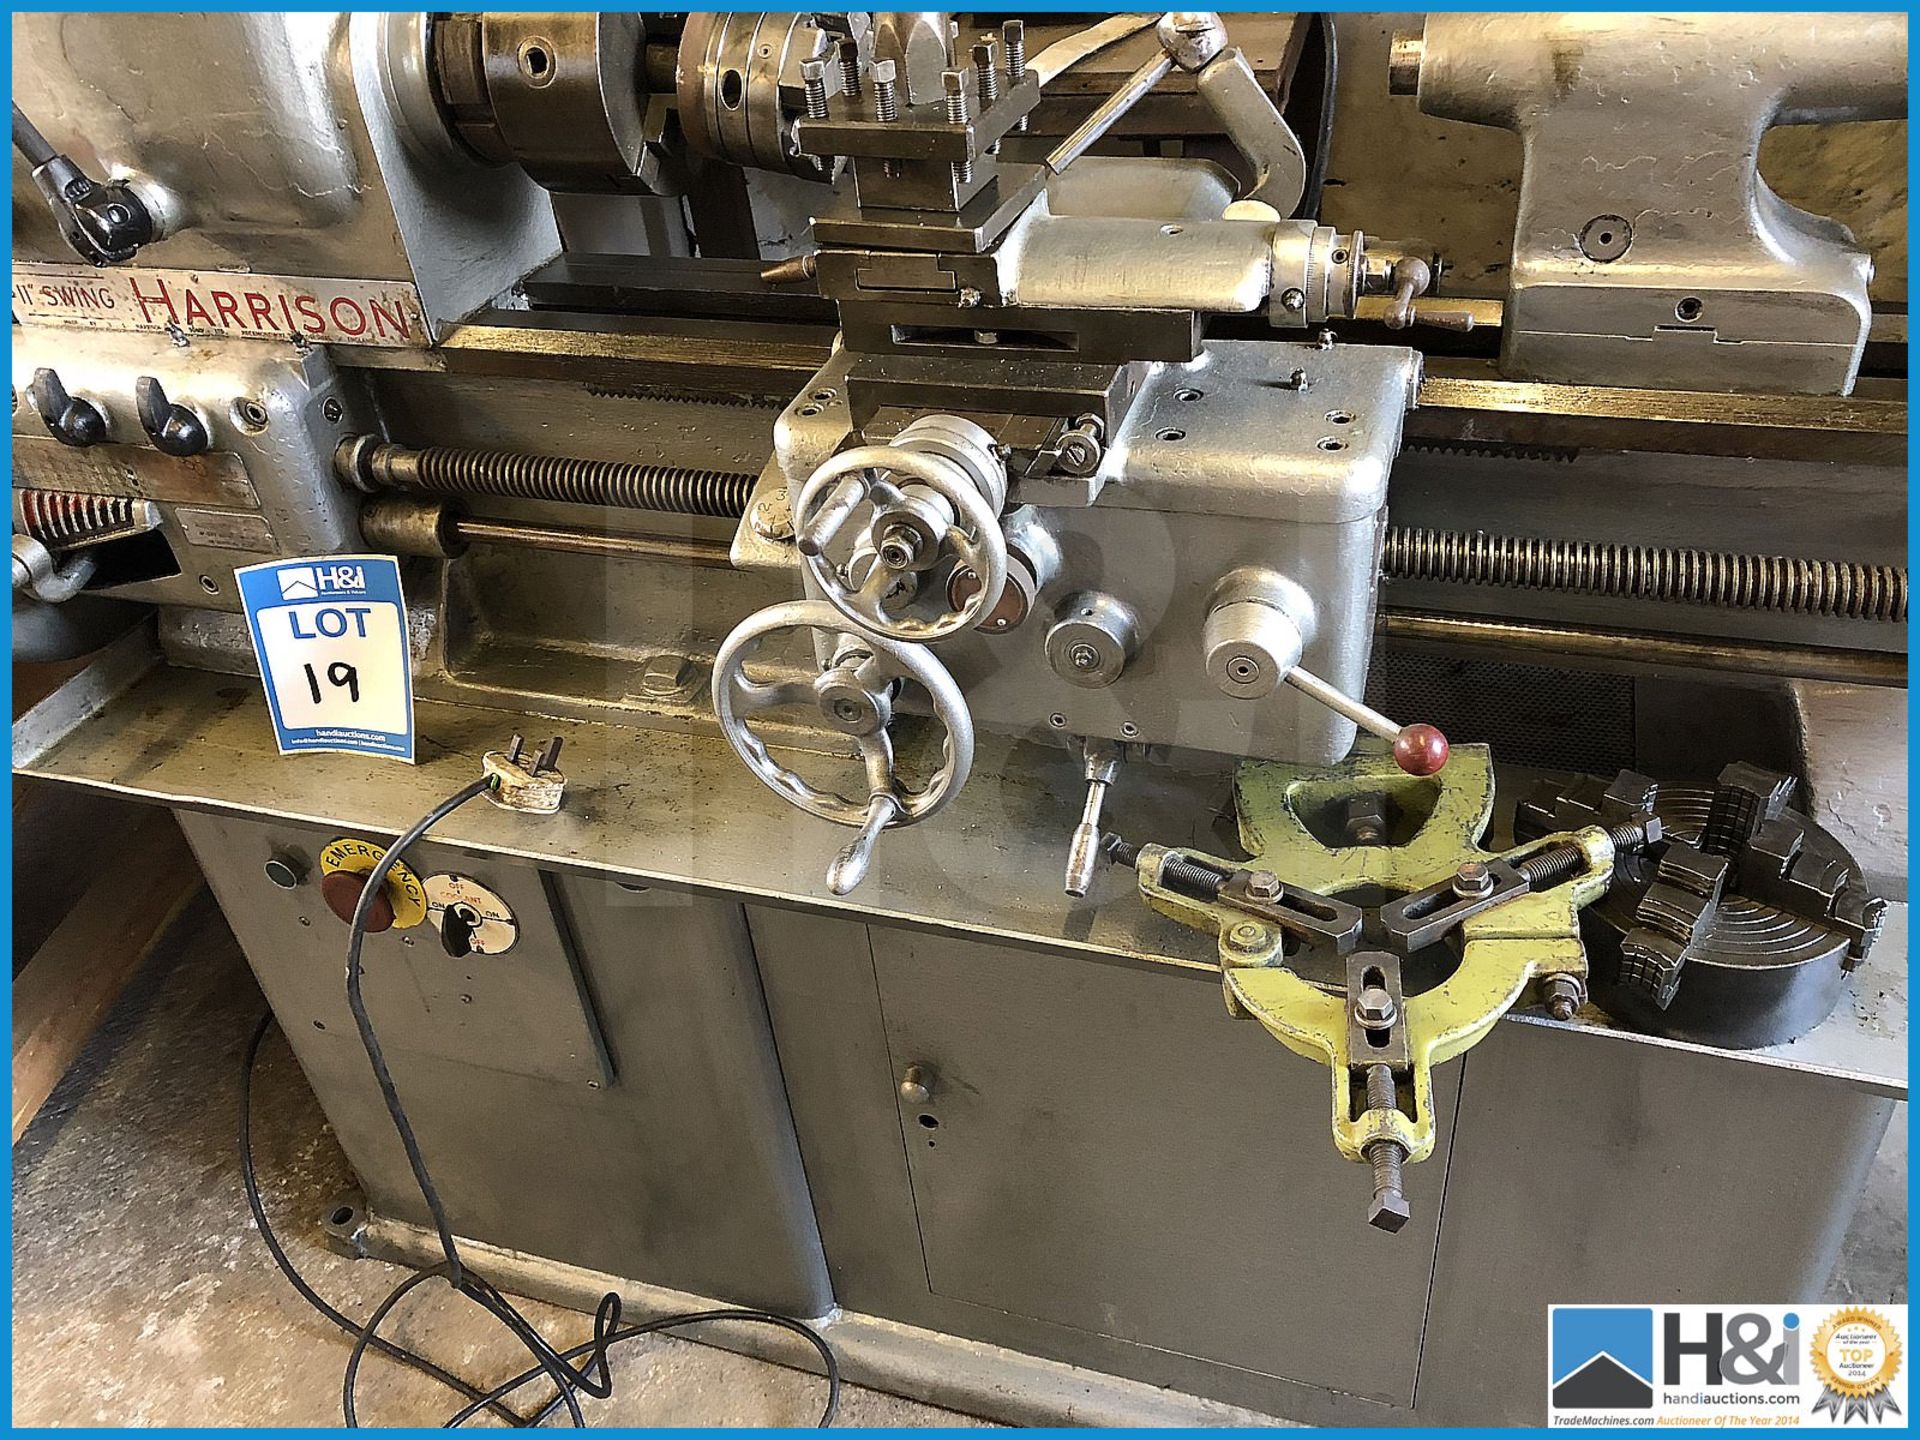 11in swing Harrison single phase metal lathe with 2 chucks, threading head and work steady - Image 7 of 9